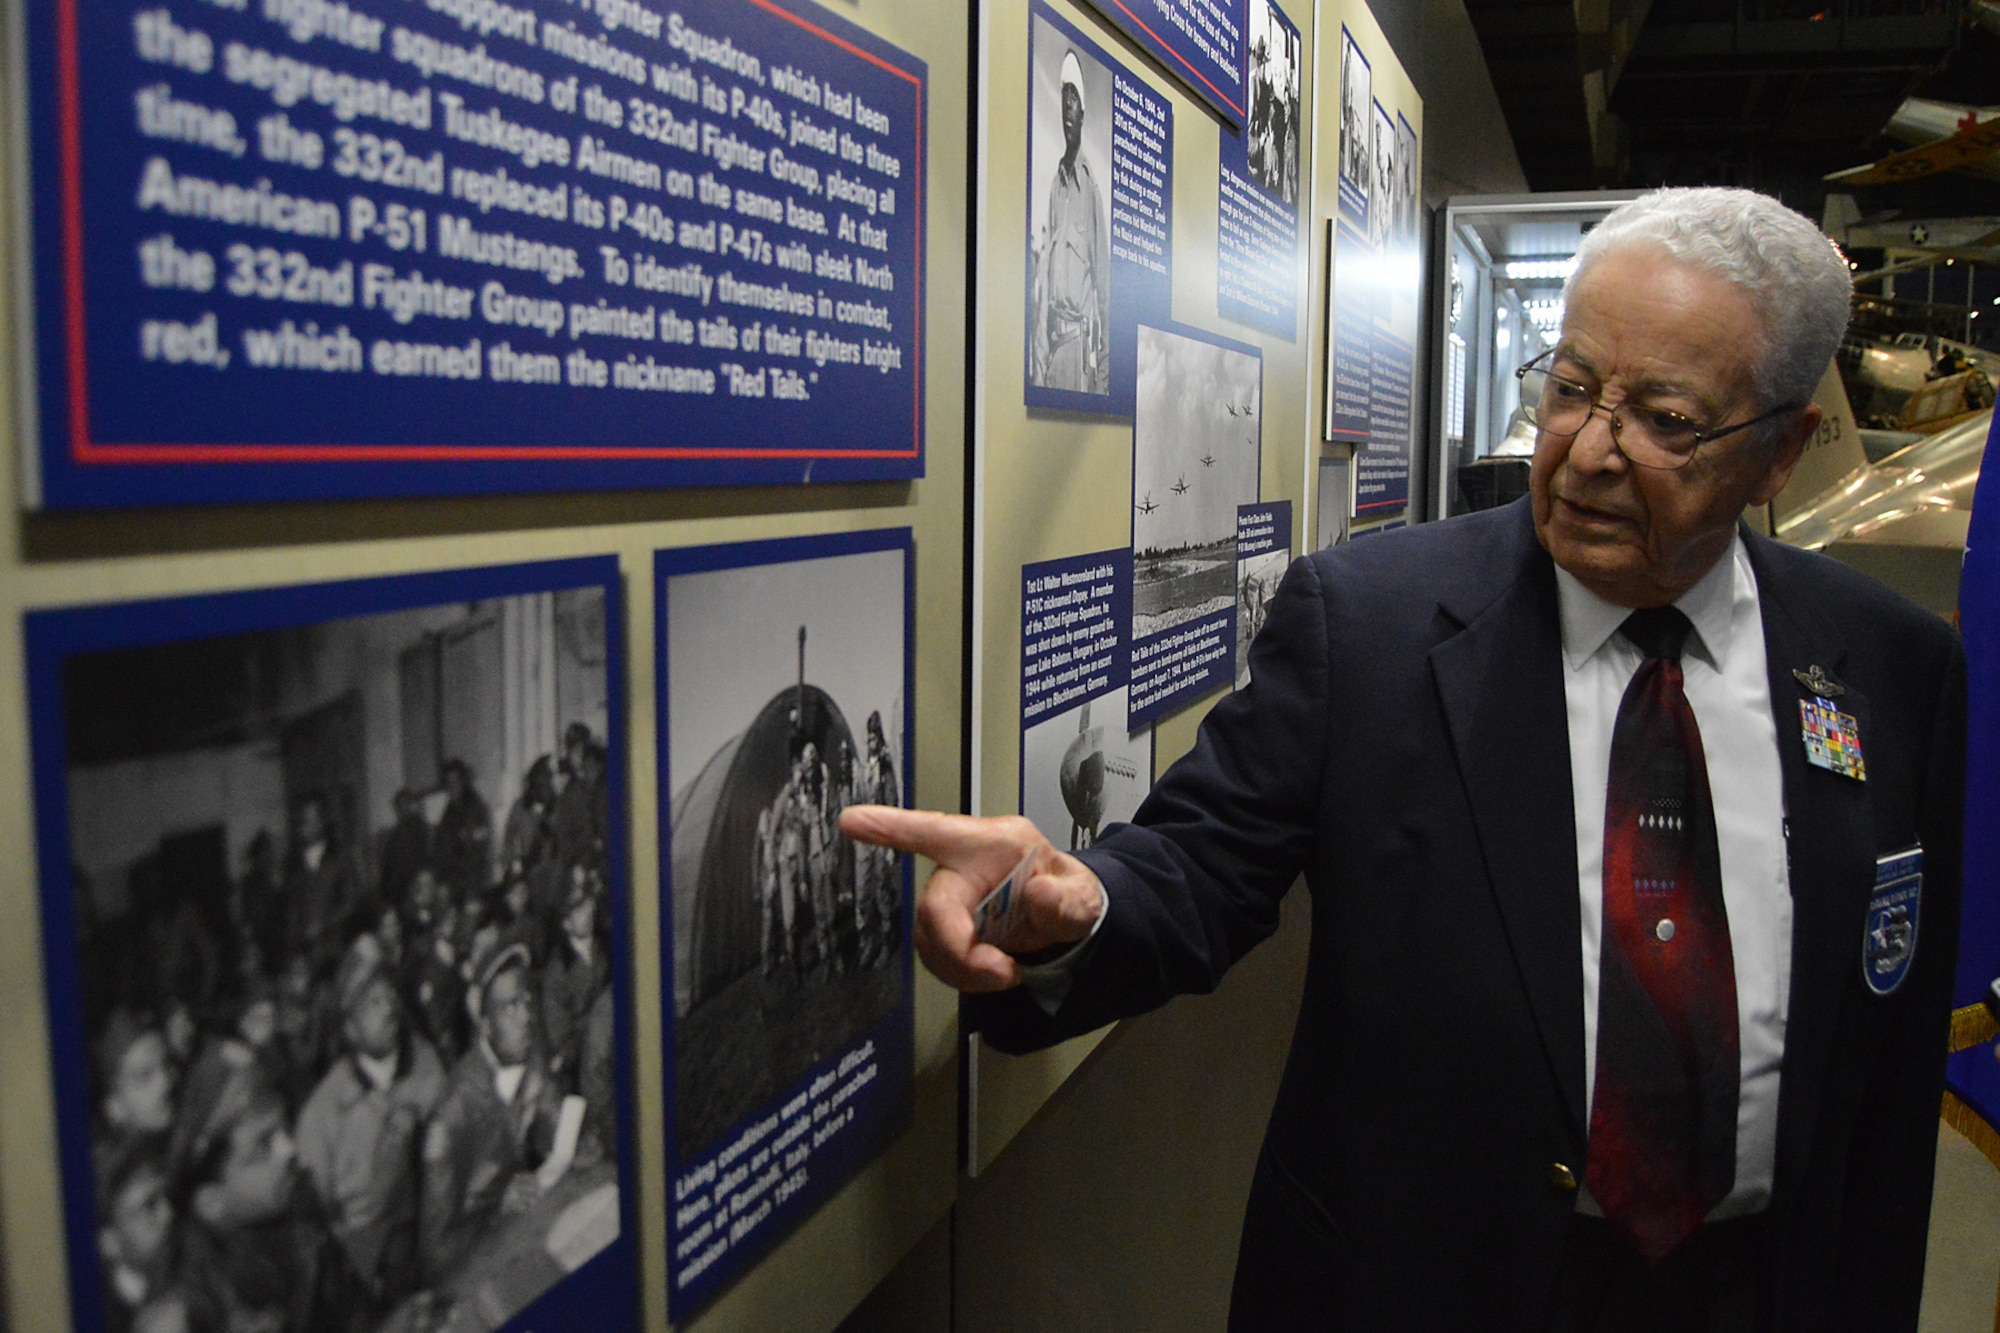 DAYTON, Ohio -- Tuskegee Airmen Lt. Col. (Ret.) George Hardy views the expanded Tuskegee Airmen exhibit in the WWII Gallery at the National Museum of the U.S. Air Force on Feb. 10, 2015. (U.S. Air Force photo)


